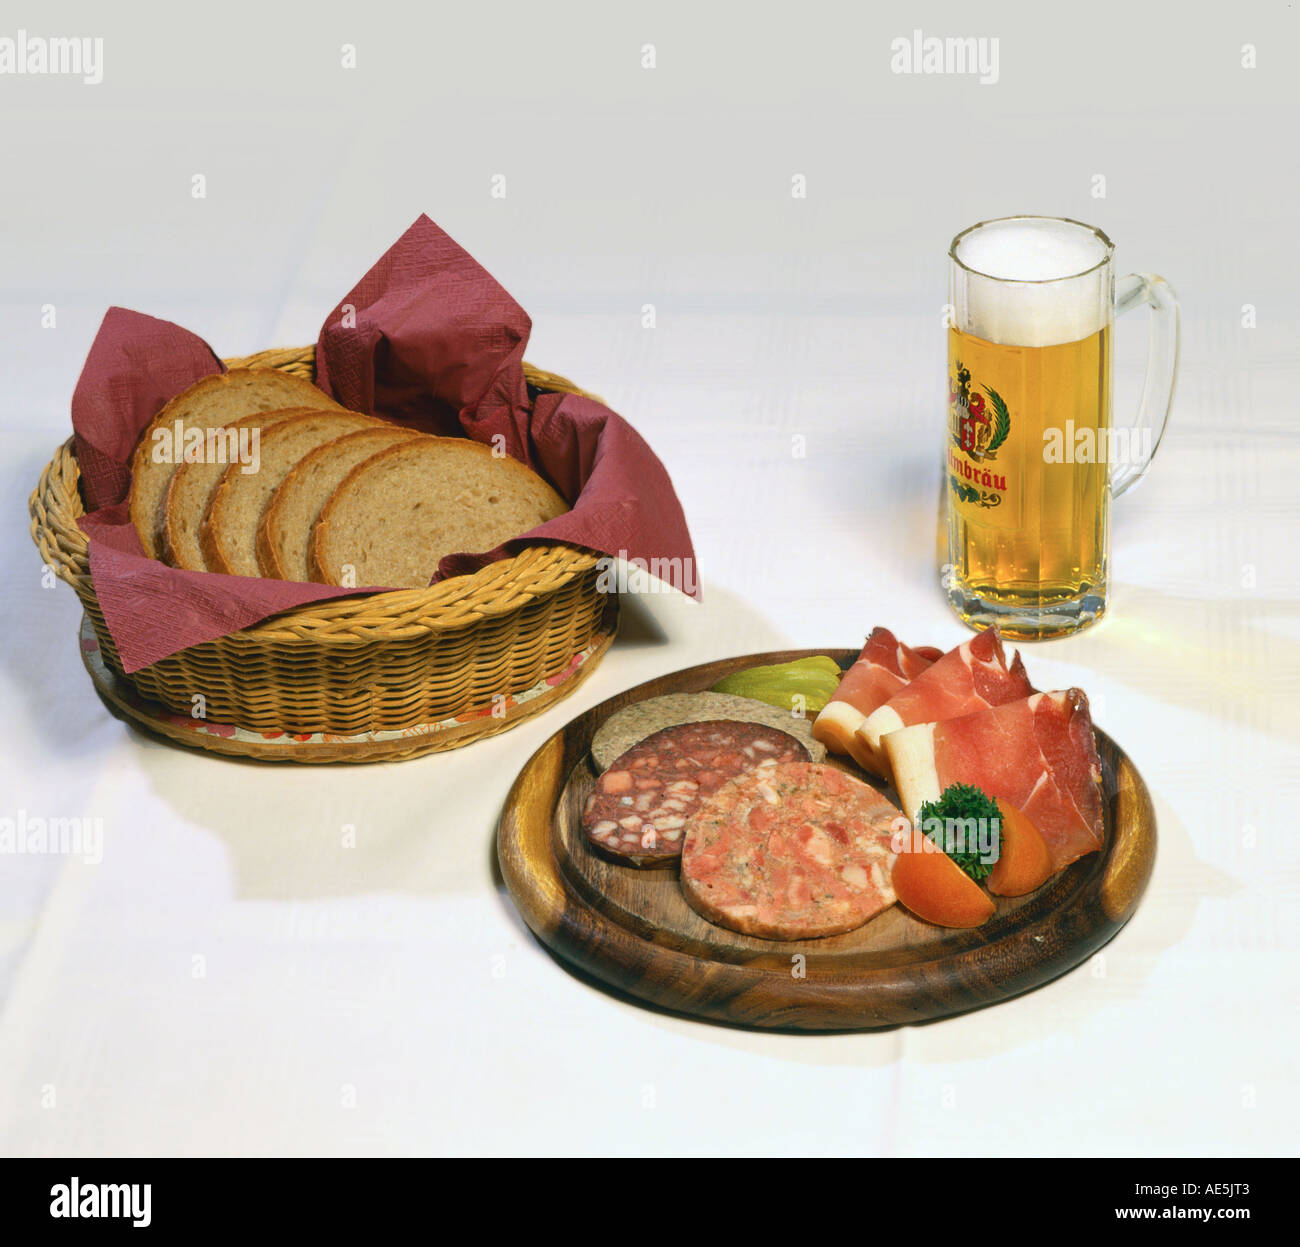 Plate with saussages and ham, basket with bread and glass of beer Stock Photo